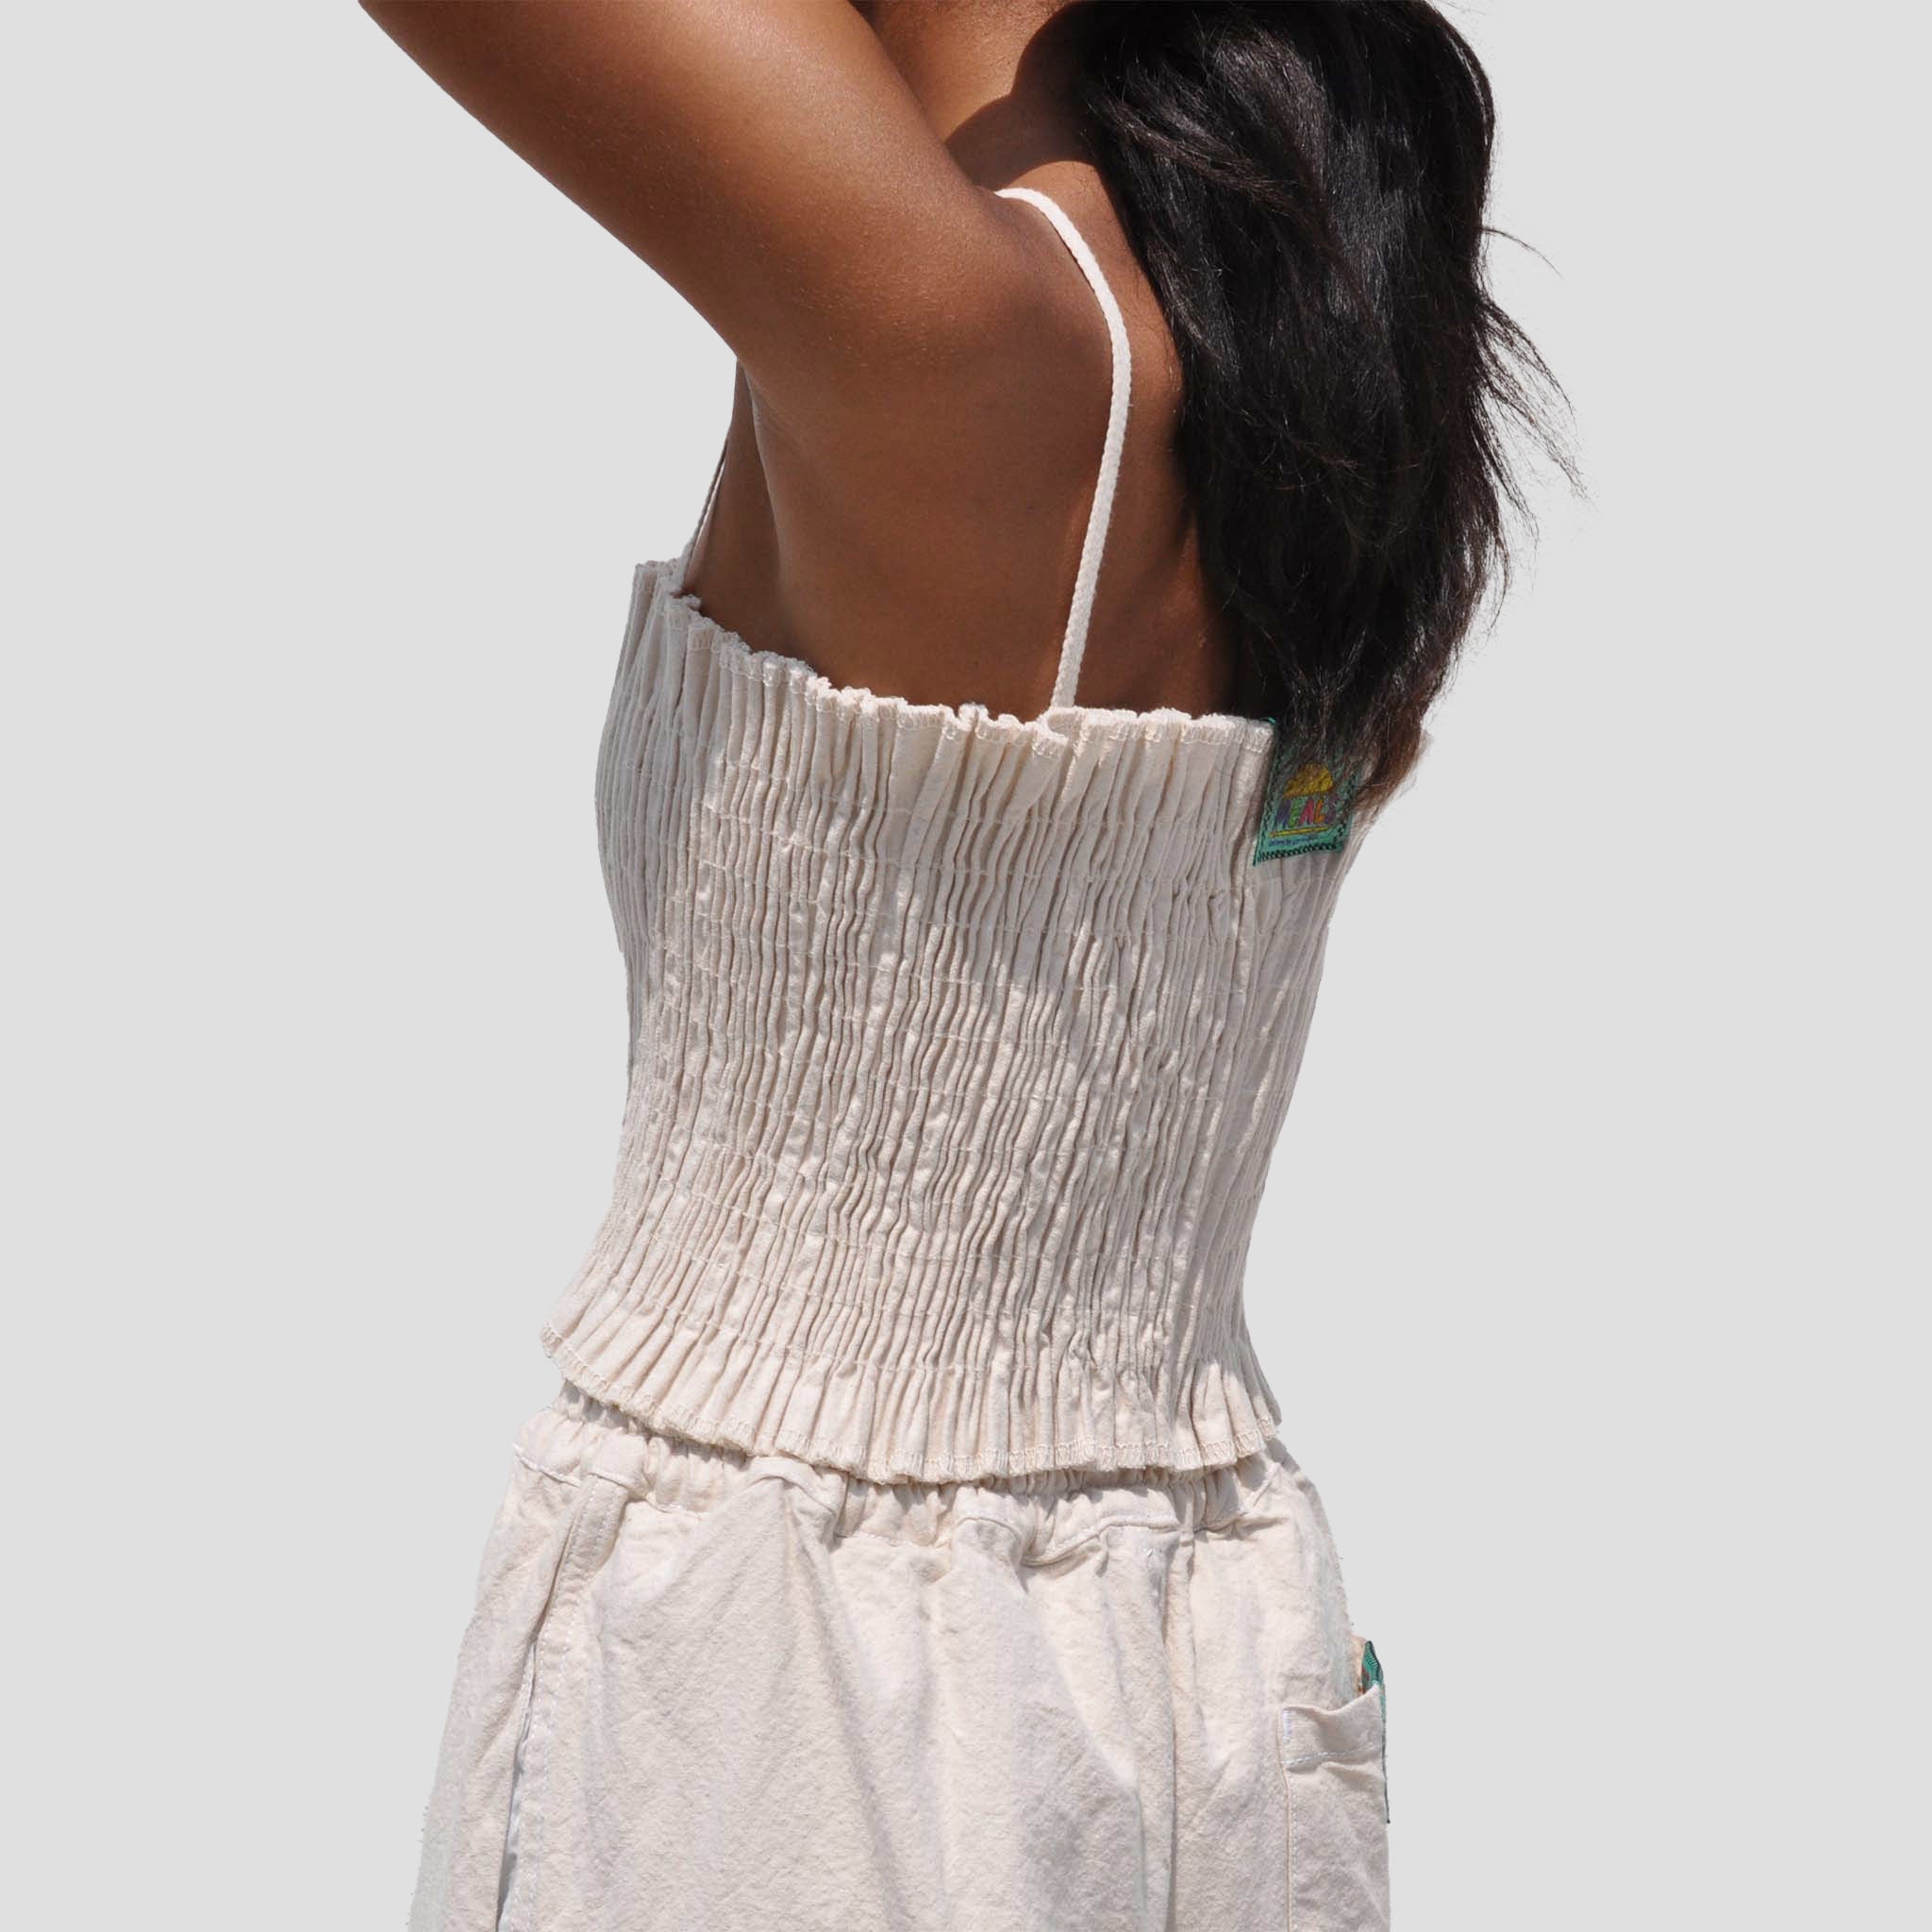 Photo of a model wearing the MEALS - Lettuce Stretch Top in flour (off white), a ruched top with shoulder straps - from the back.